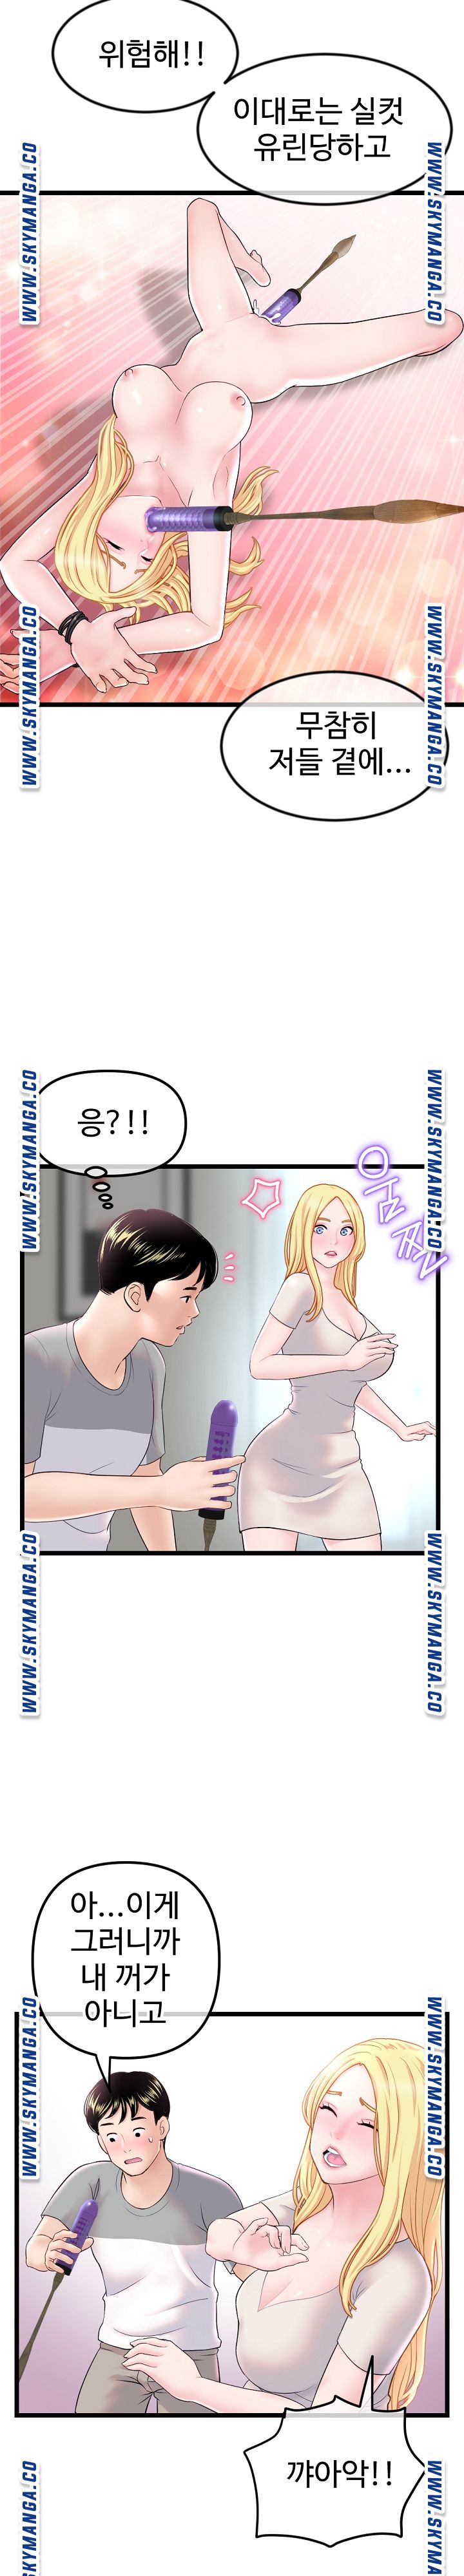 Late night PC Room Raw - Chapter 33 Page 6